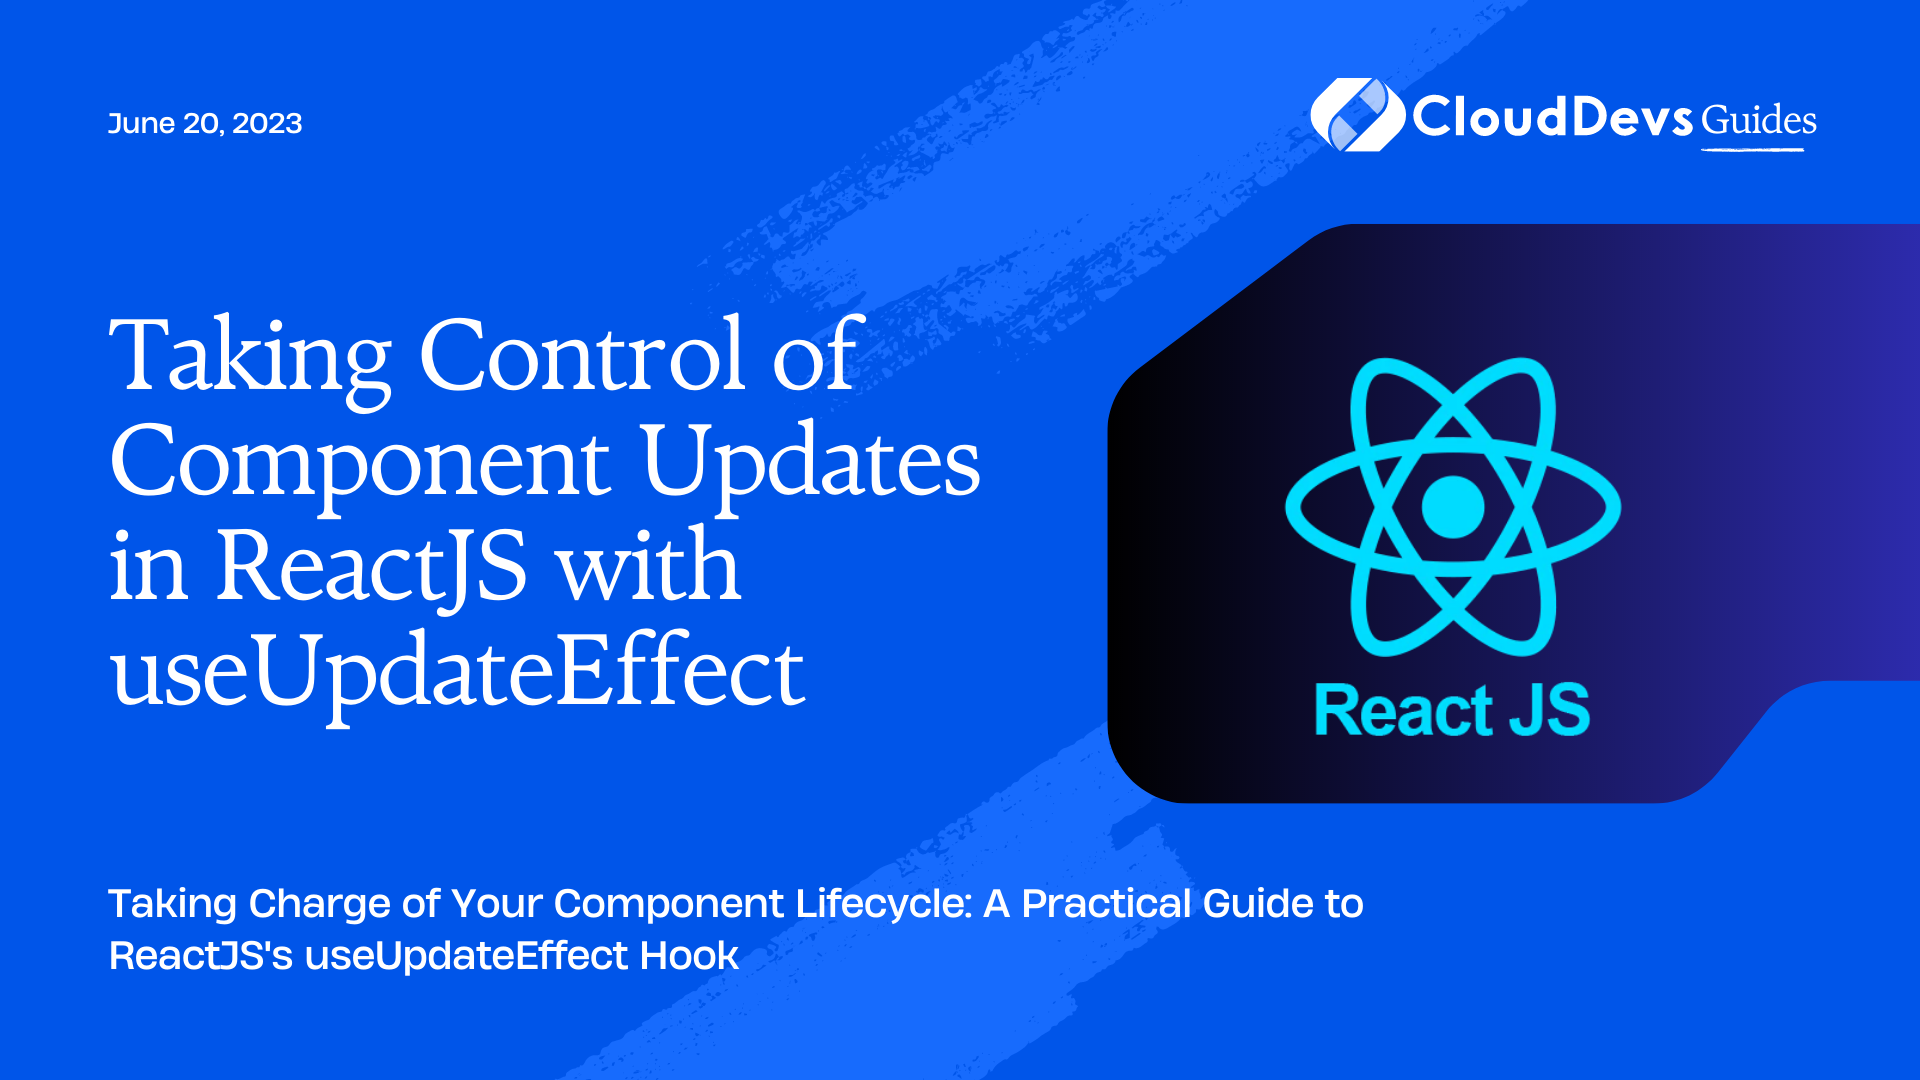 Taking Control of Component Updates in ReactJS with useUpdateEffect